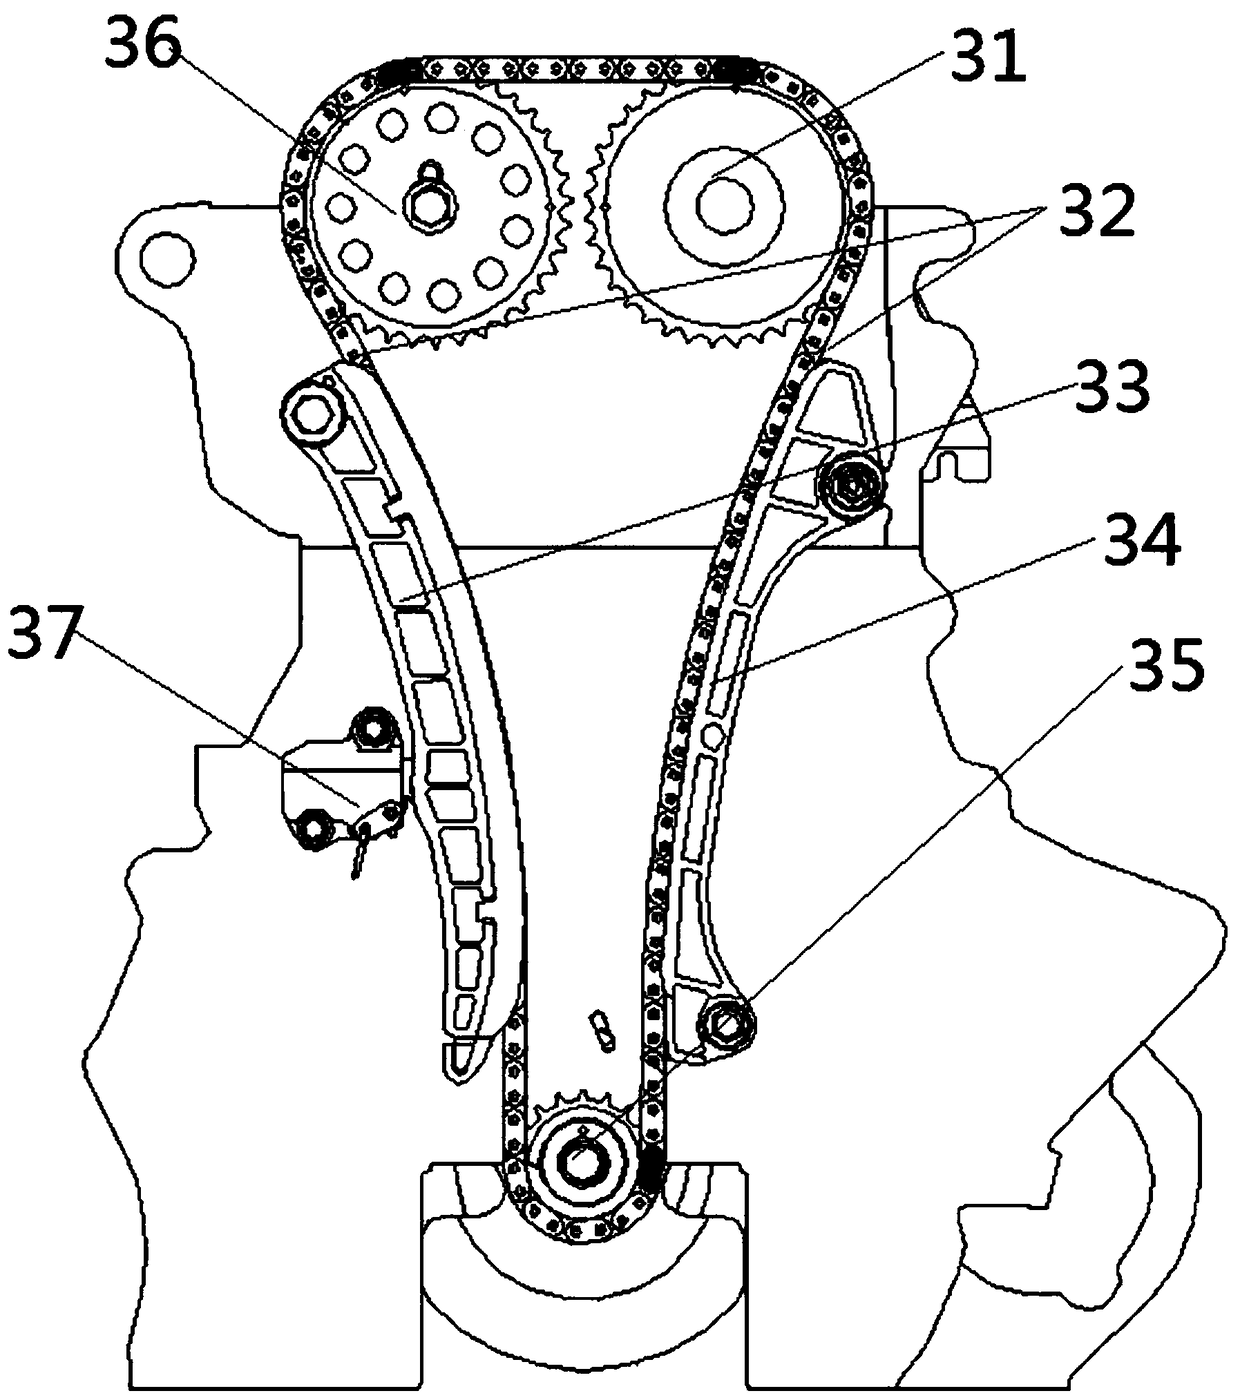 A timing chain transmission mechanism